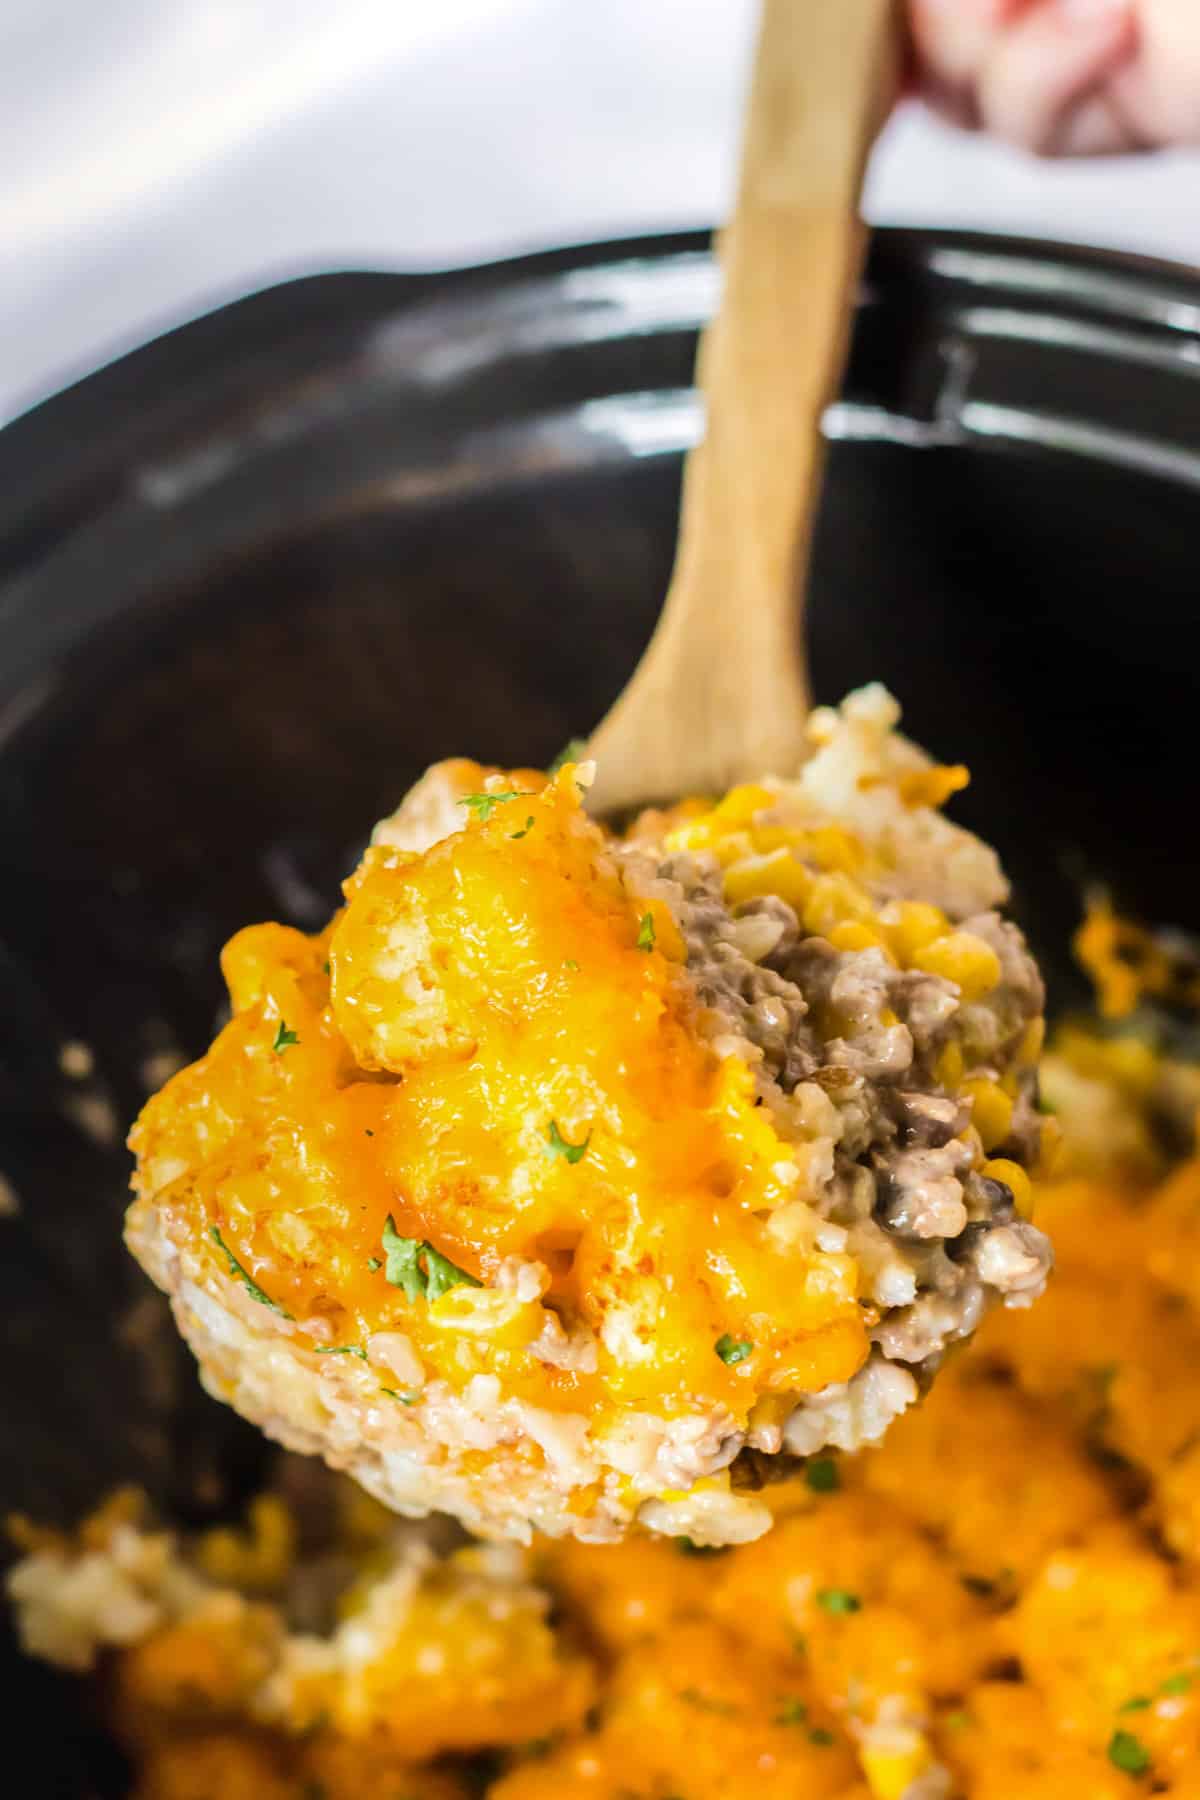 Spoon scooping out serving of slow cooker tater tot casserole.